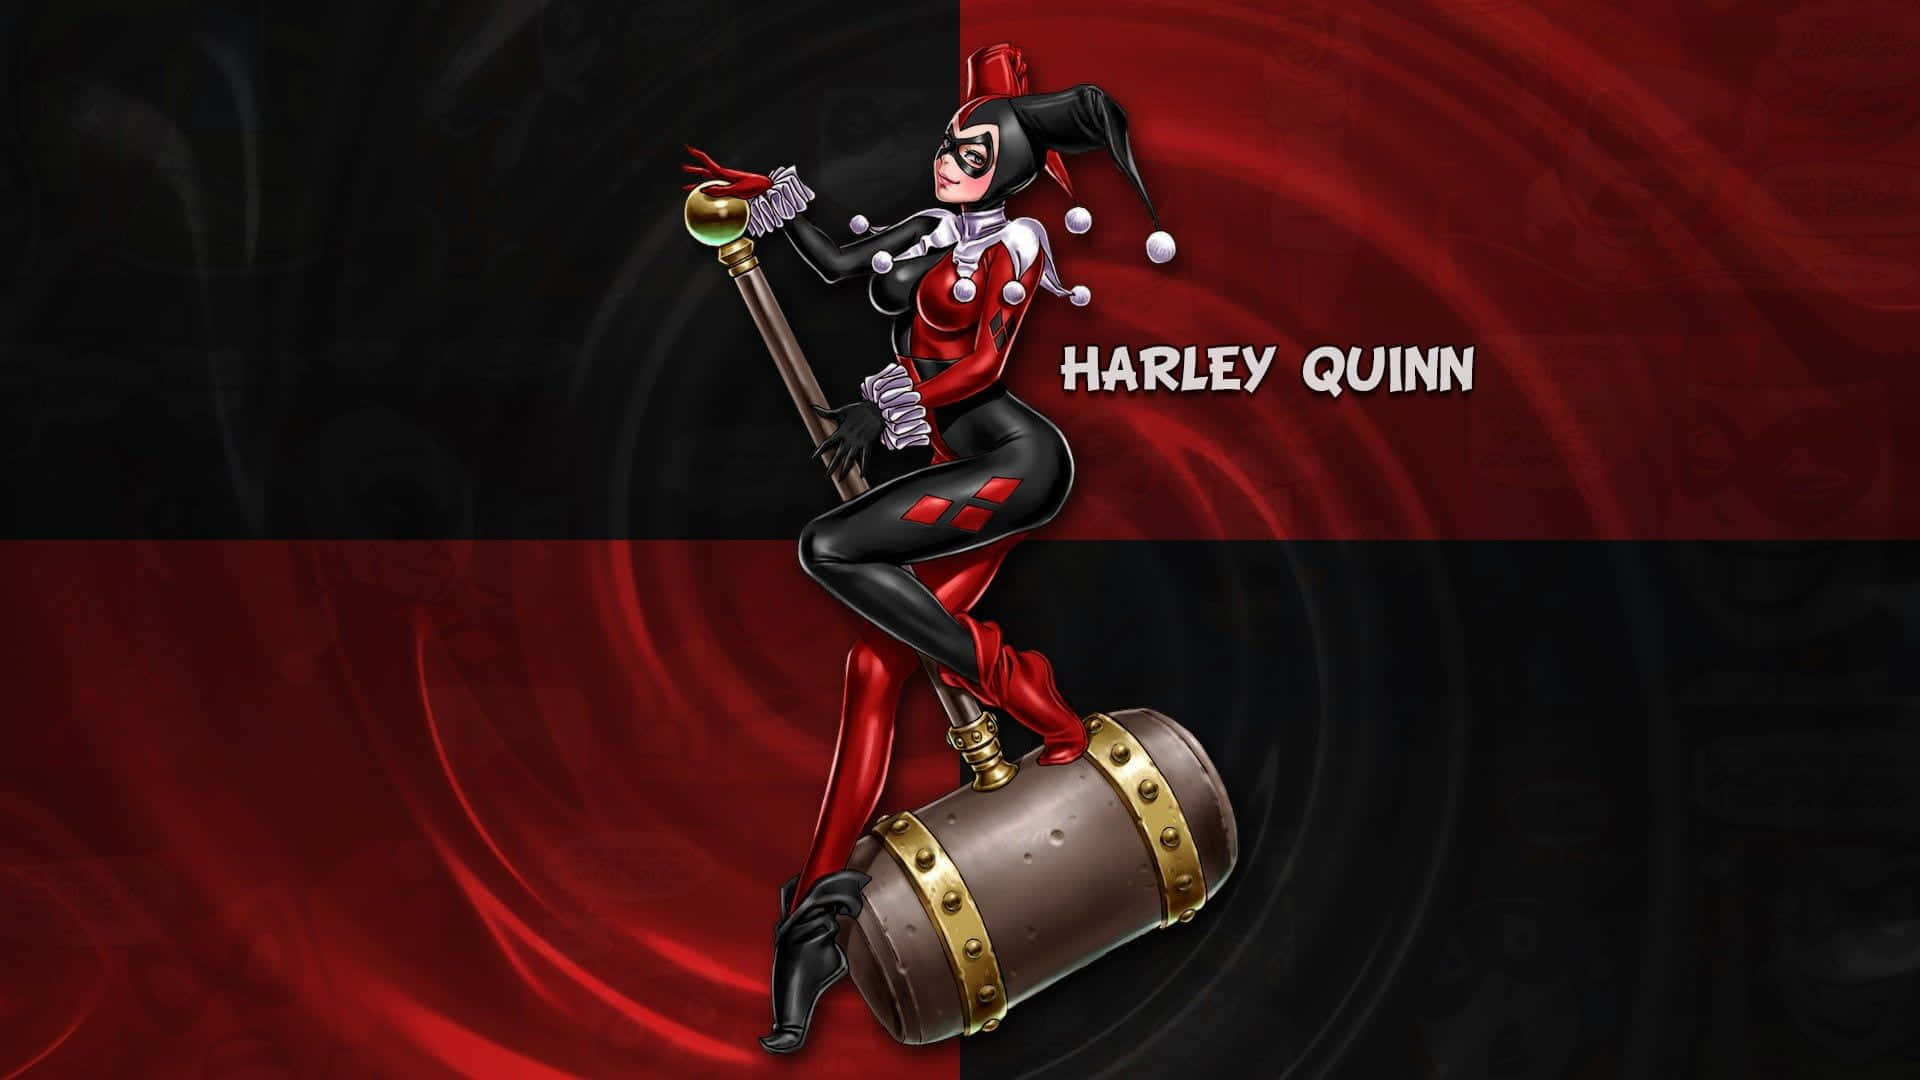 Harley Quinn with her iconic hammer in action Wallpaper